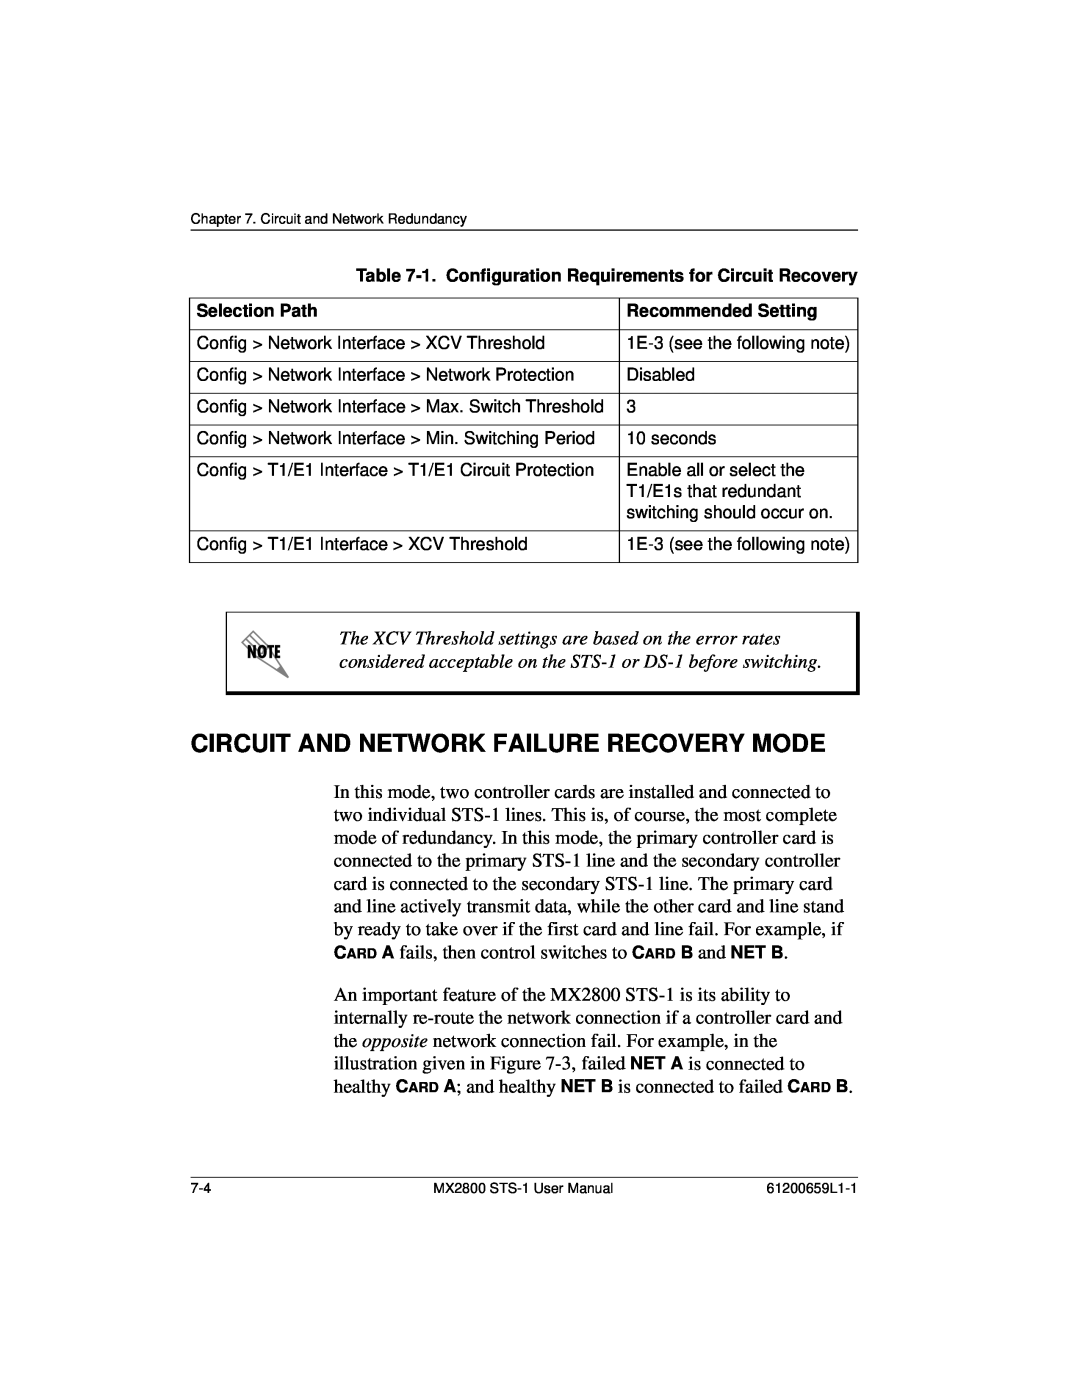 ADTRAN 4200659L3, 4200659L1 Circuit And Network Failure Recovery Mode, 1. Configuration Requirements for Circuit Recovery 